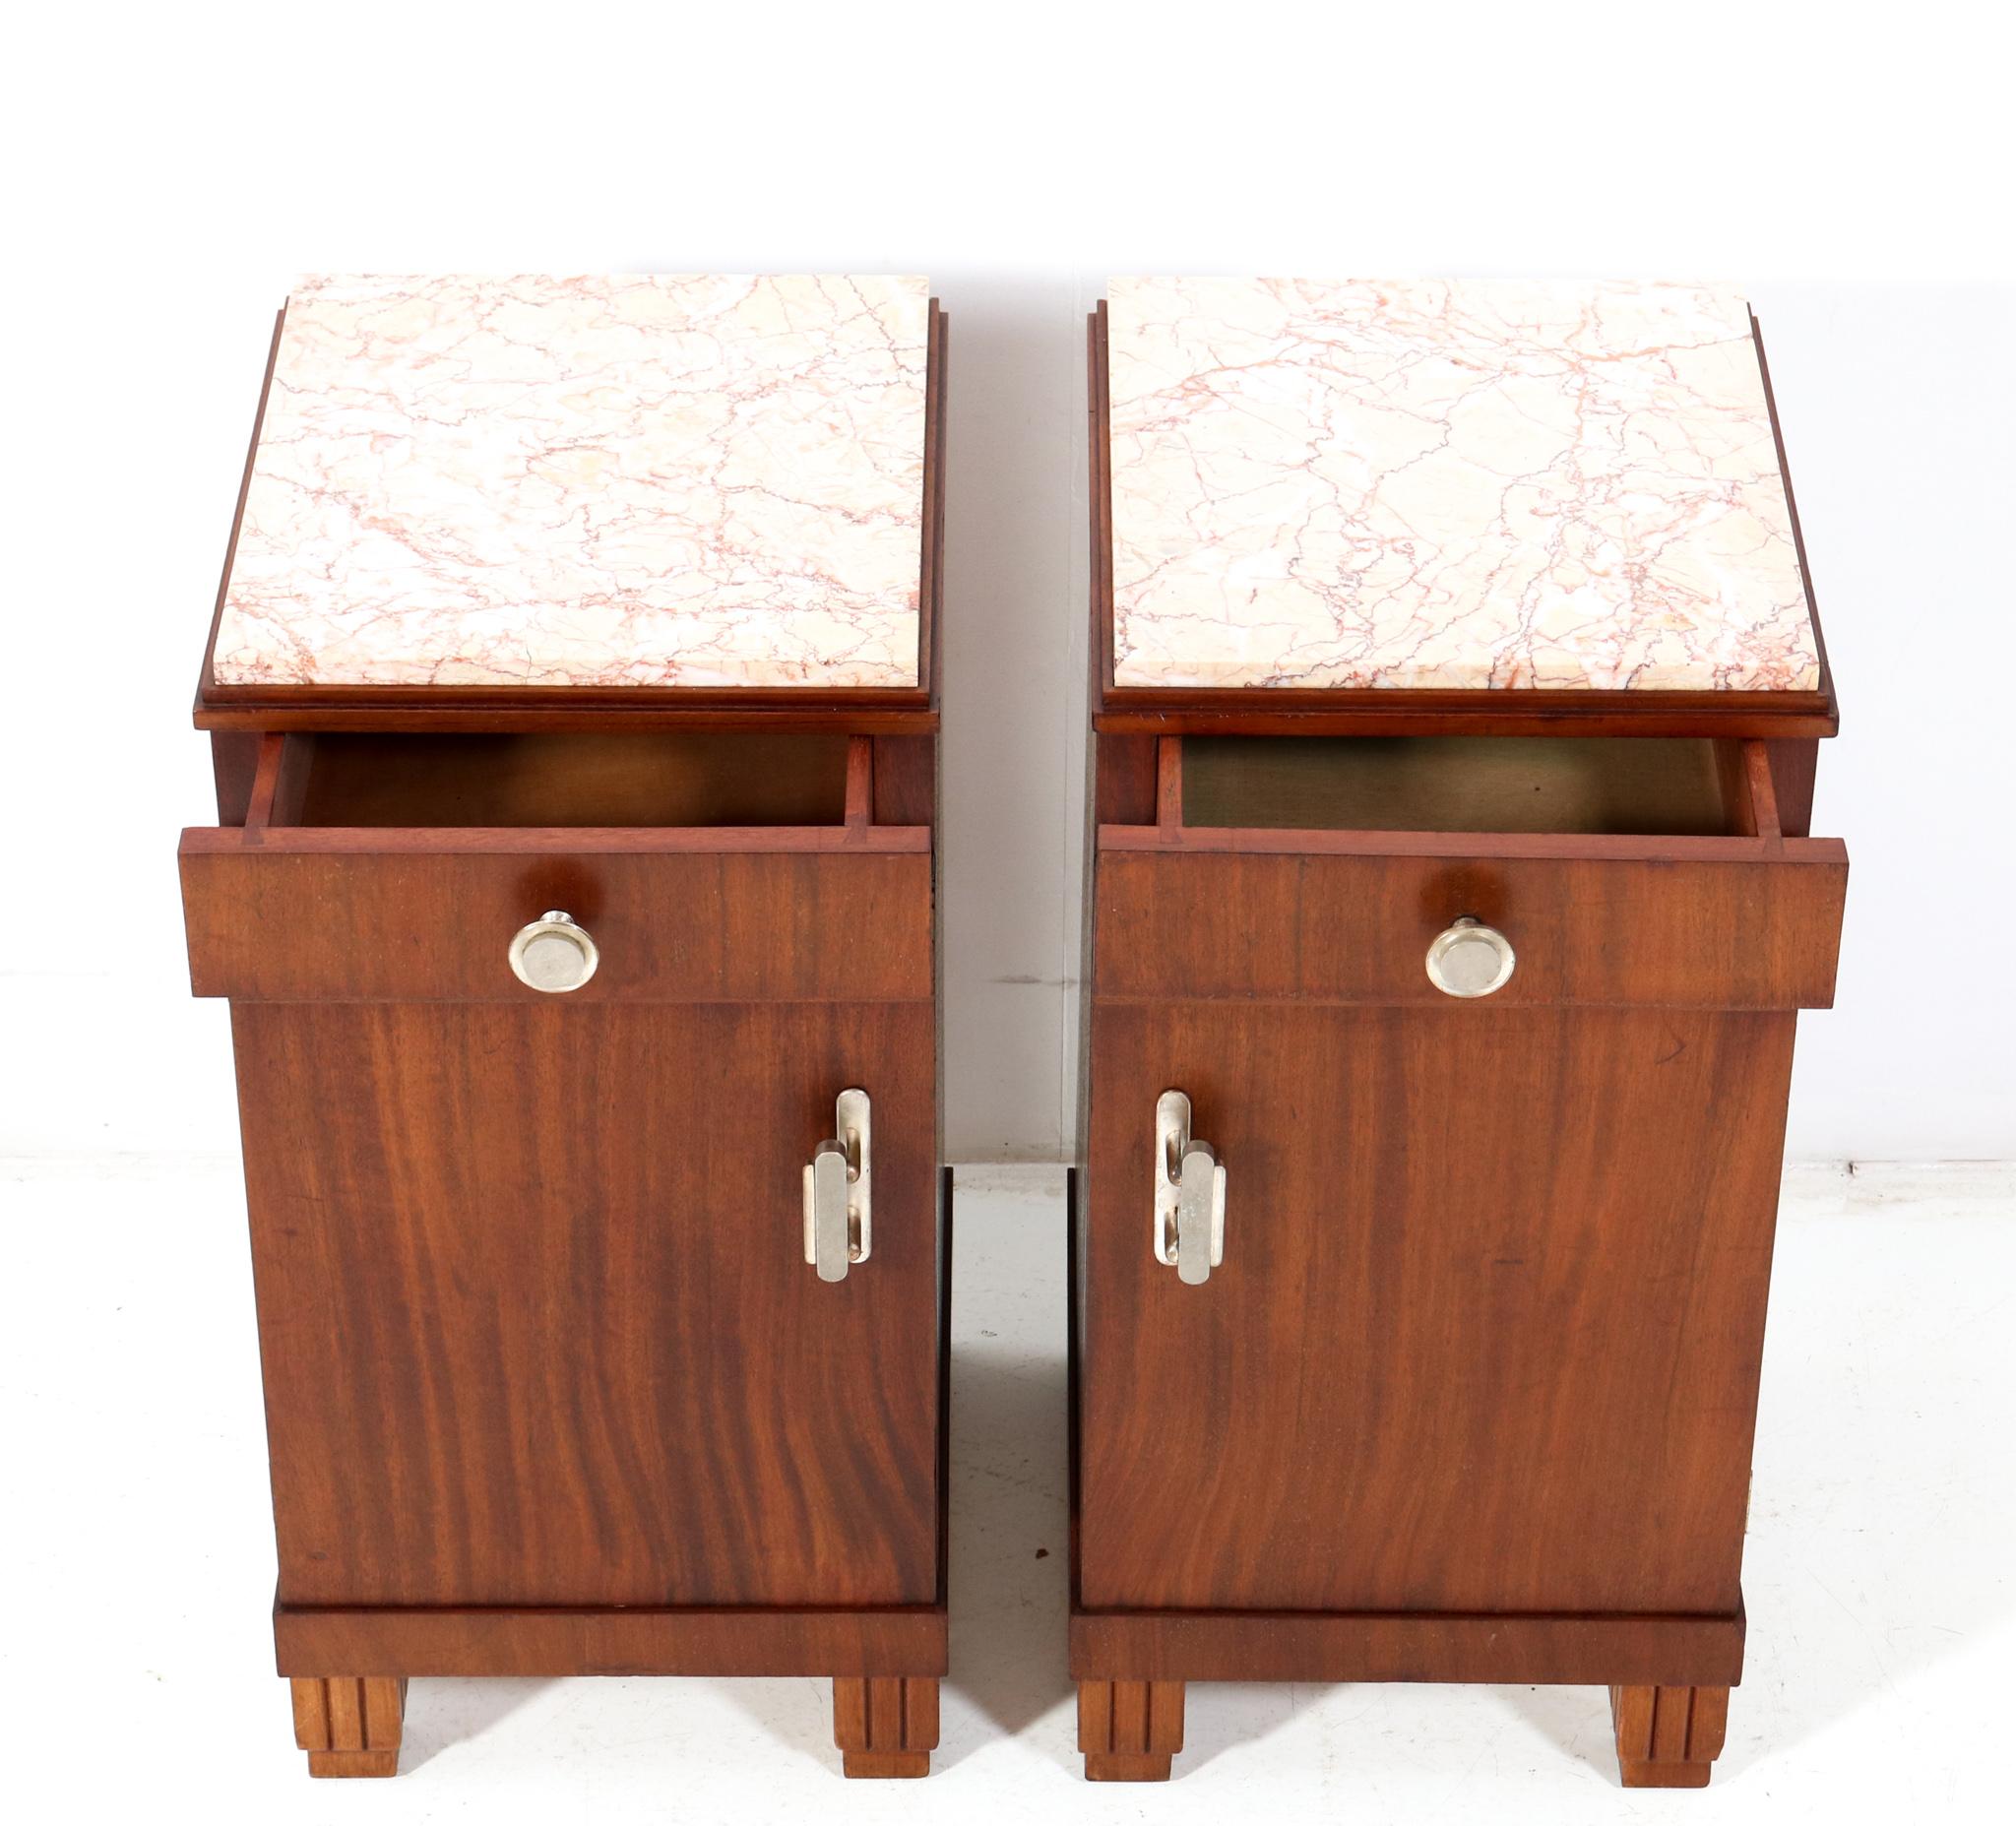 Two Walnut Art Deco Nightstands or Bedside Tables, 1930s In Good Condition For Sale In Amsterdam, NL